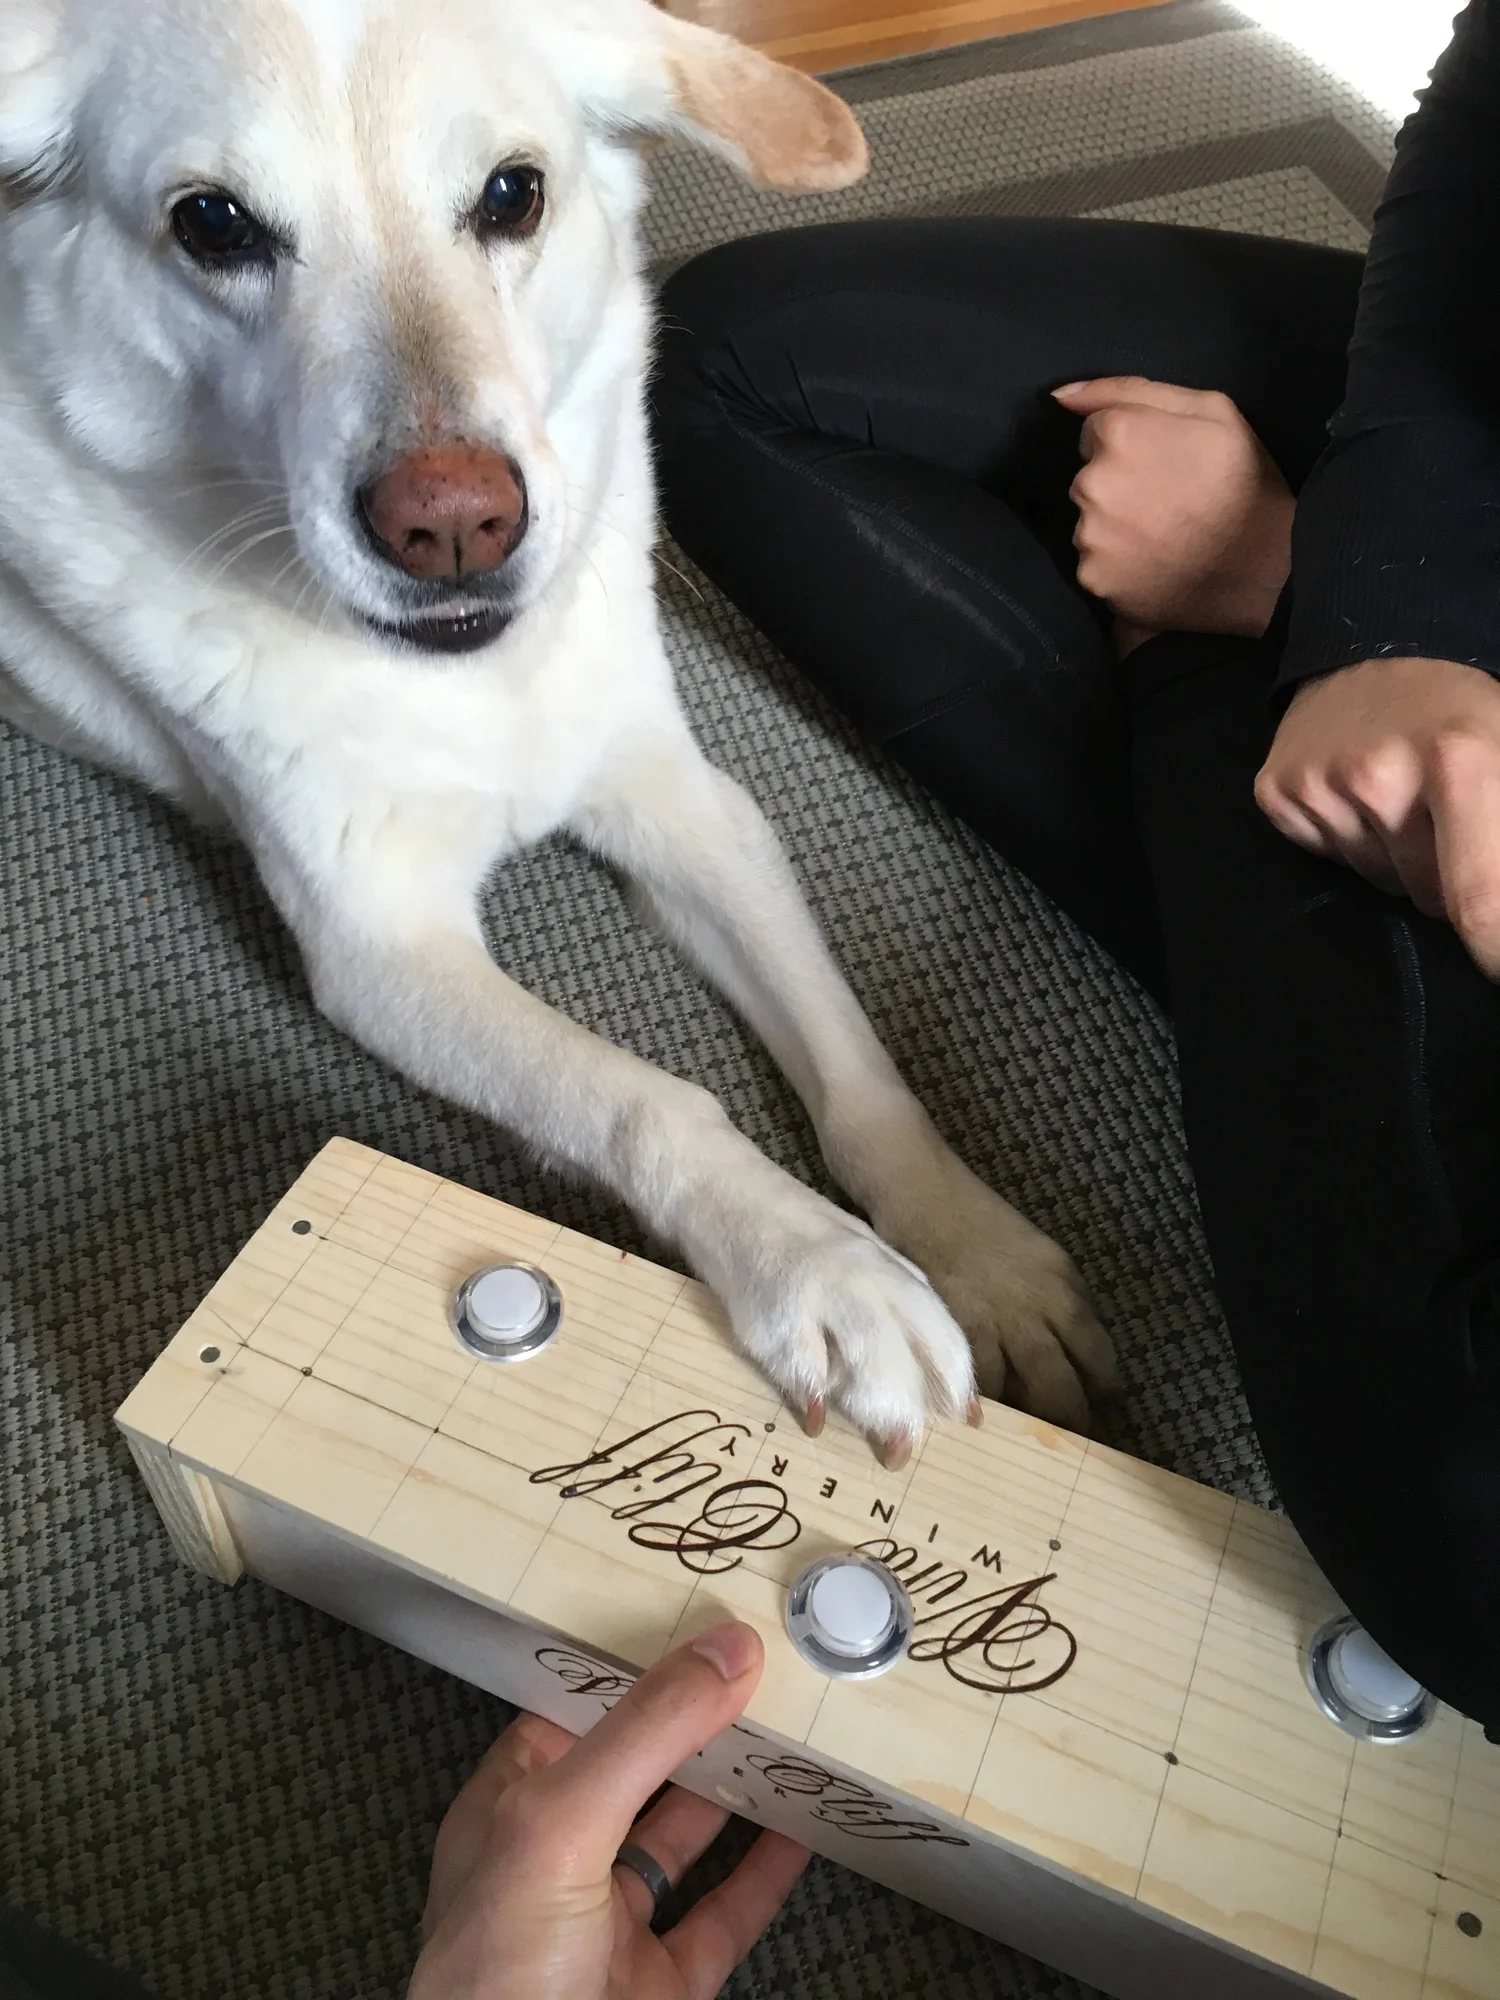 Cosmo puts his paw on a wooden box with three, white buttons. A person with a black top and black pants is sitting beside him.